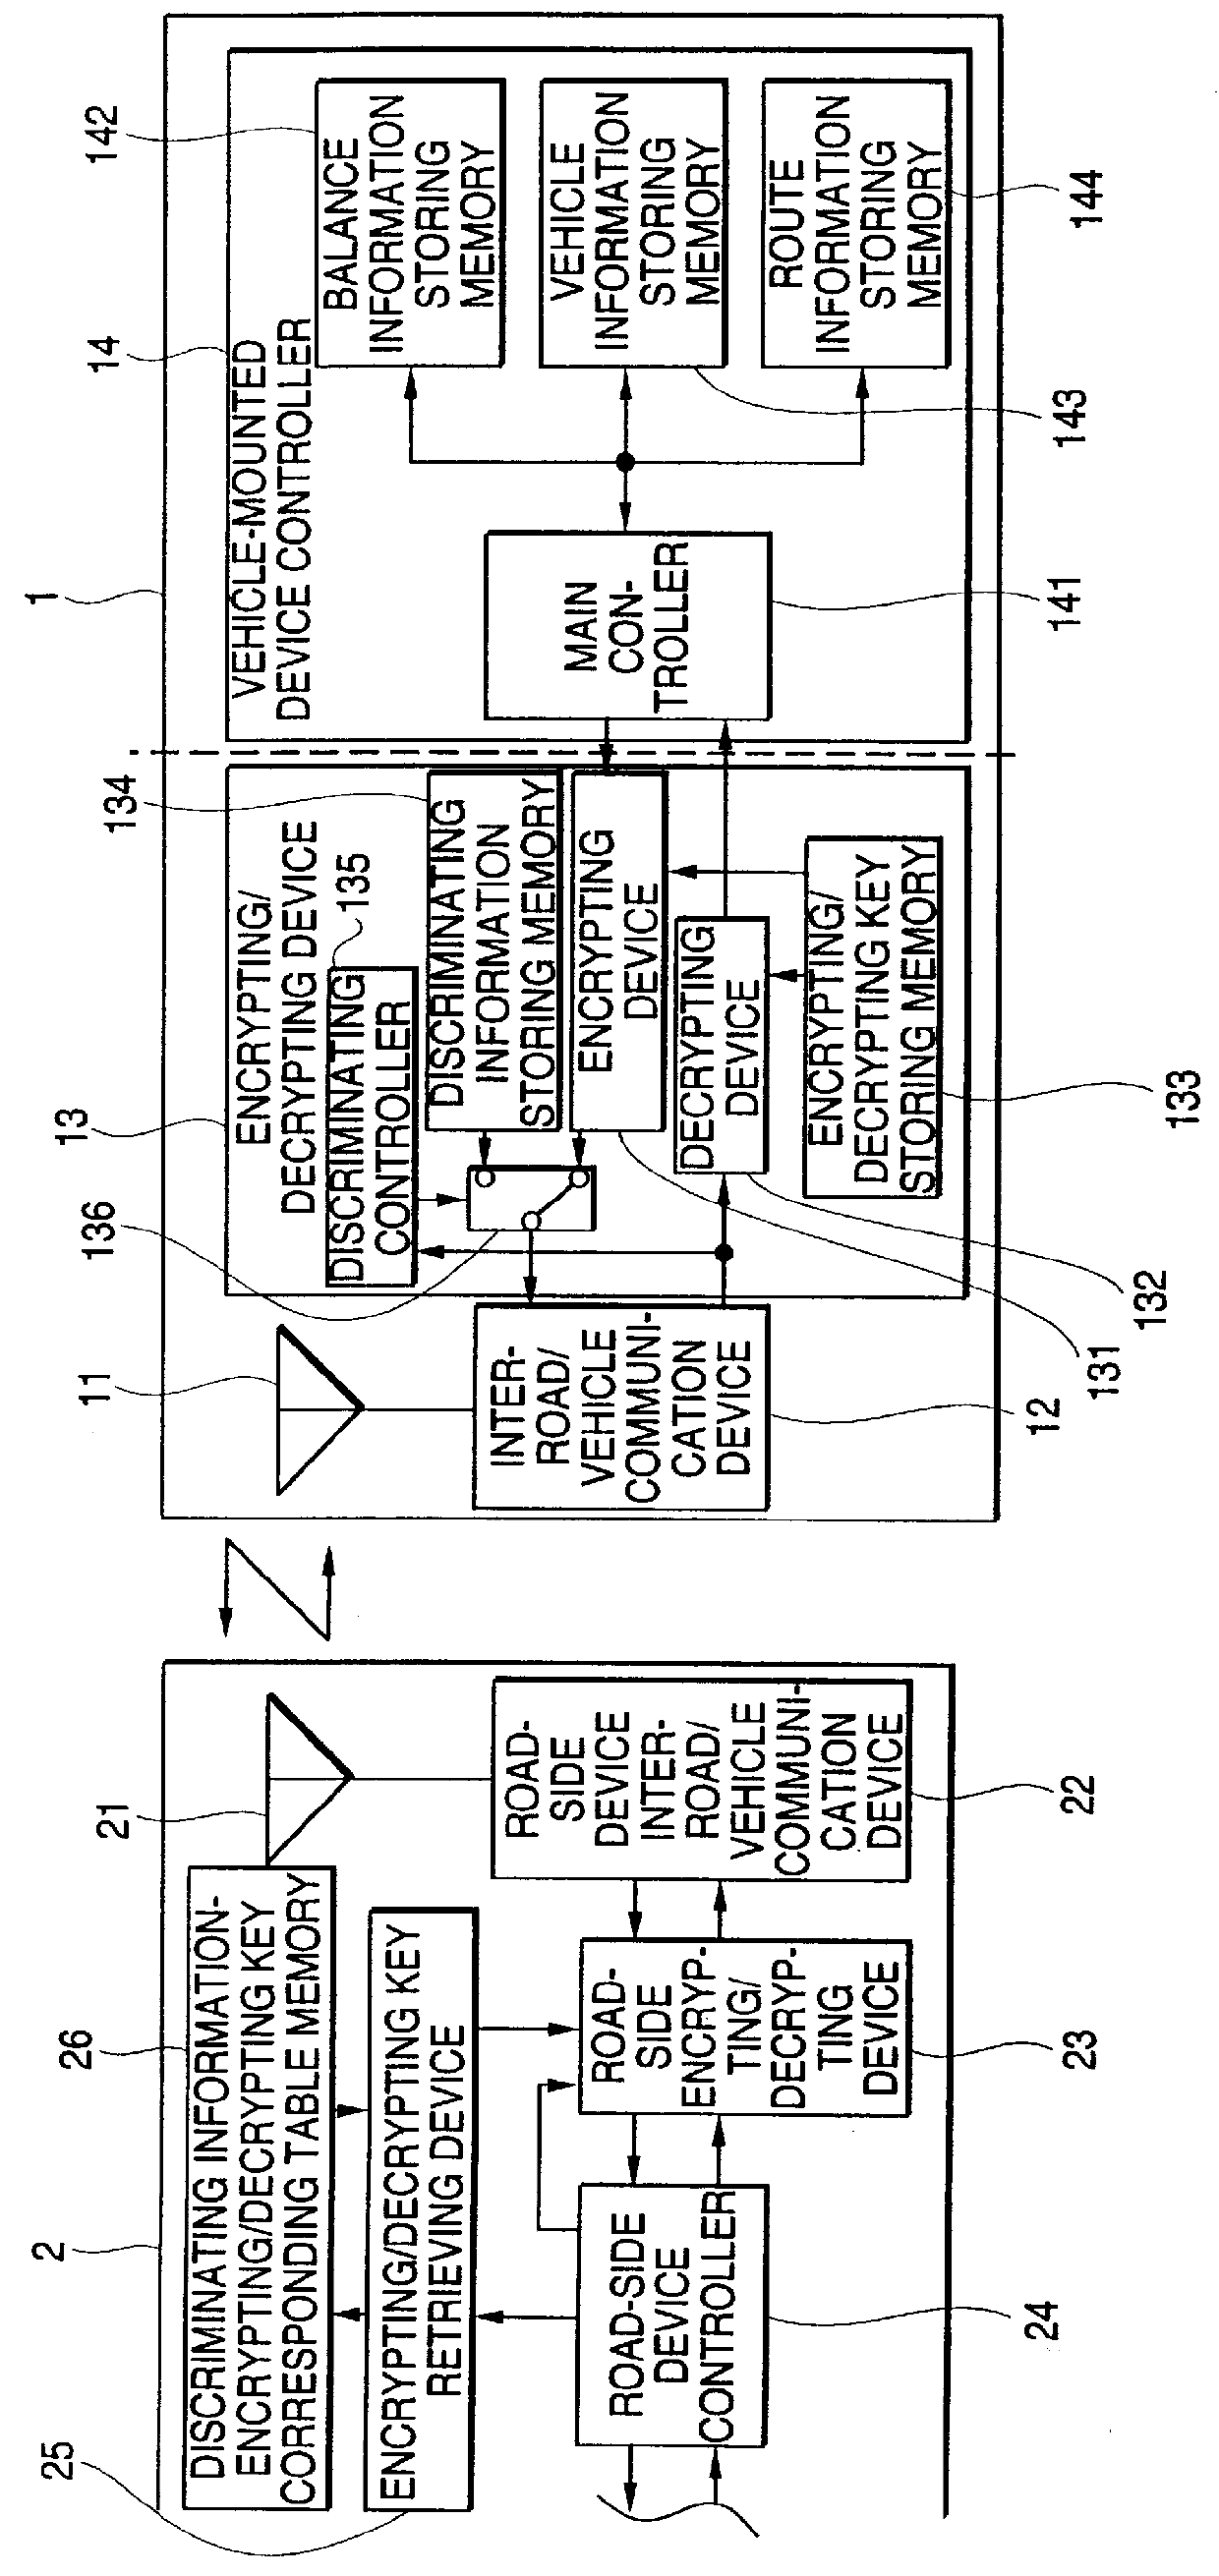 Vehicle-mounted device for automatic charge receipt system